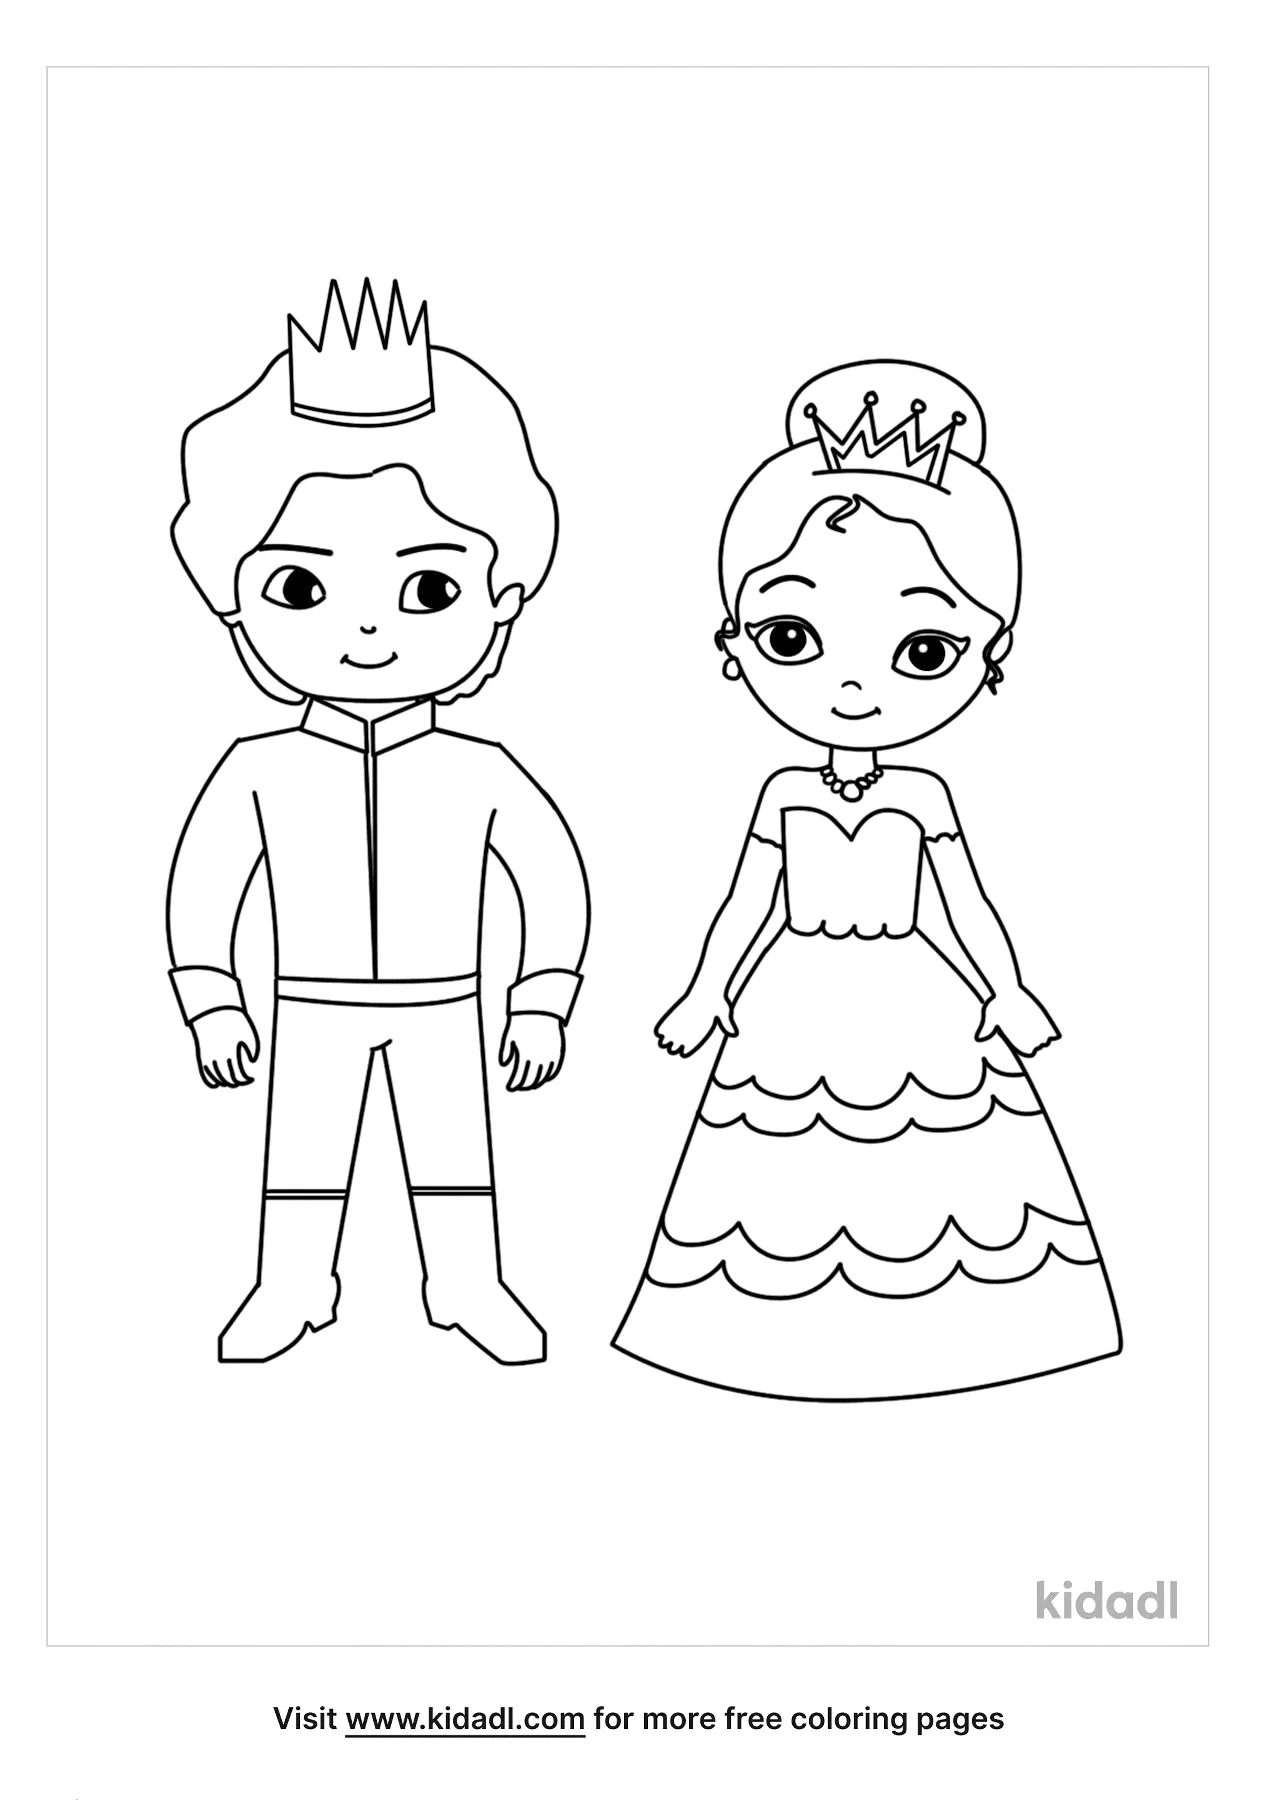 Princess Coloring Pages | Coloring Pages | Kidadl